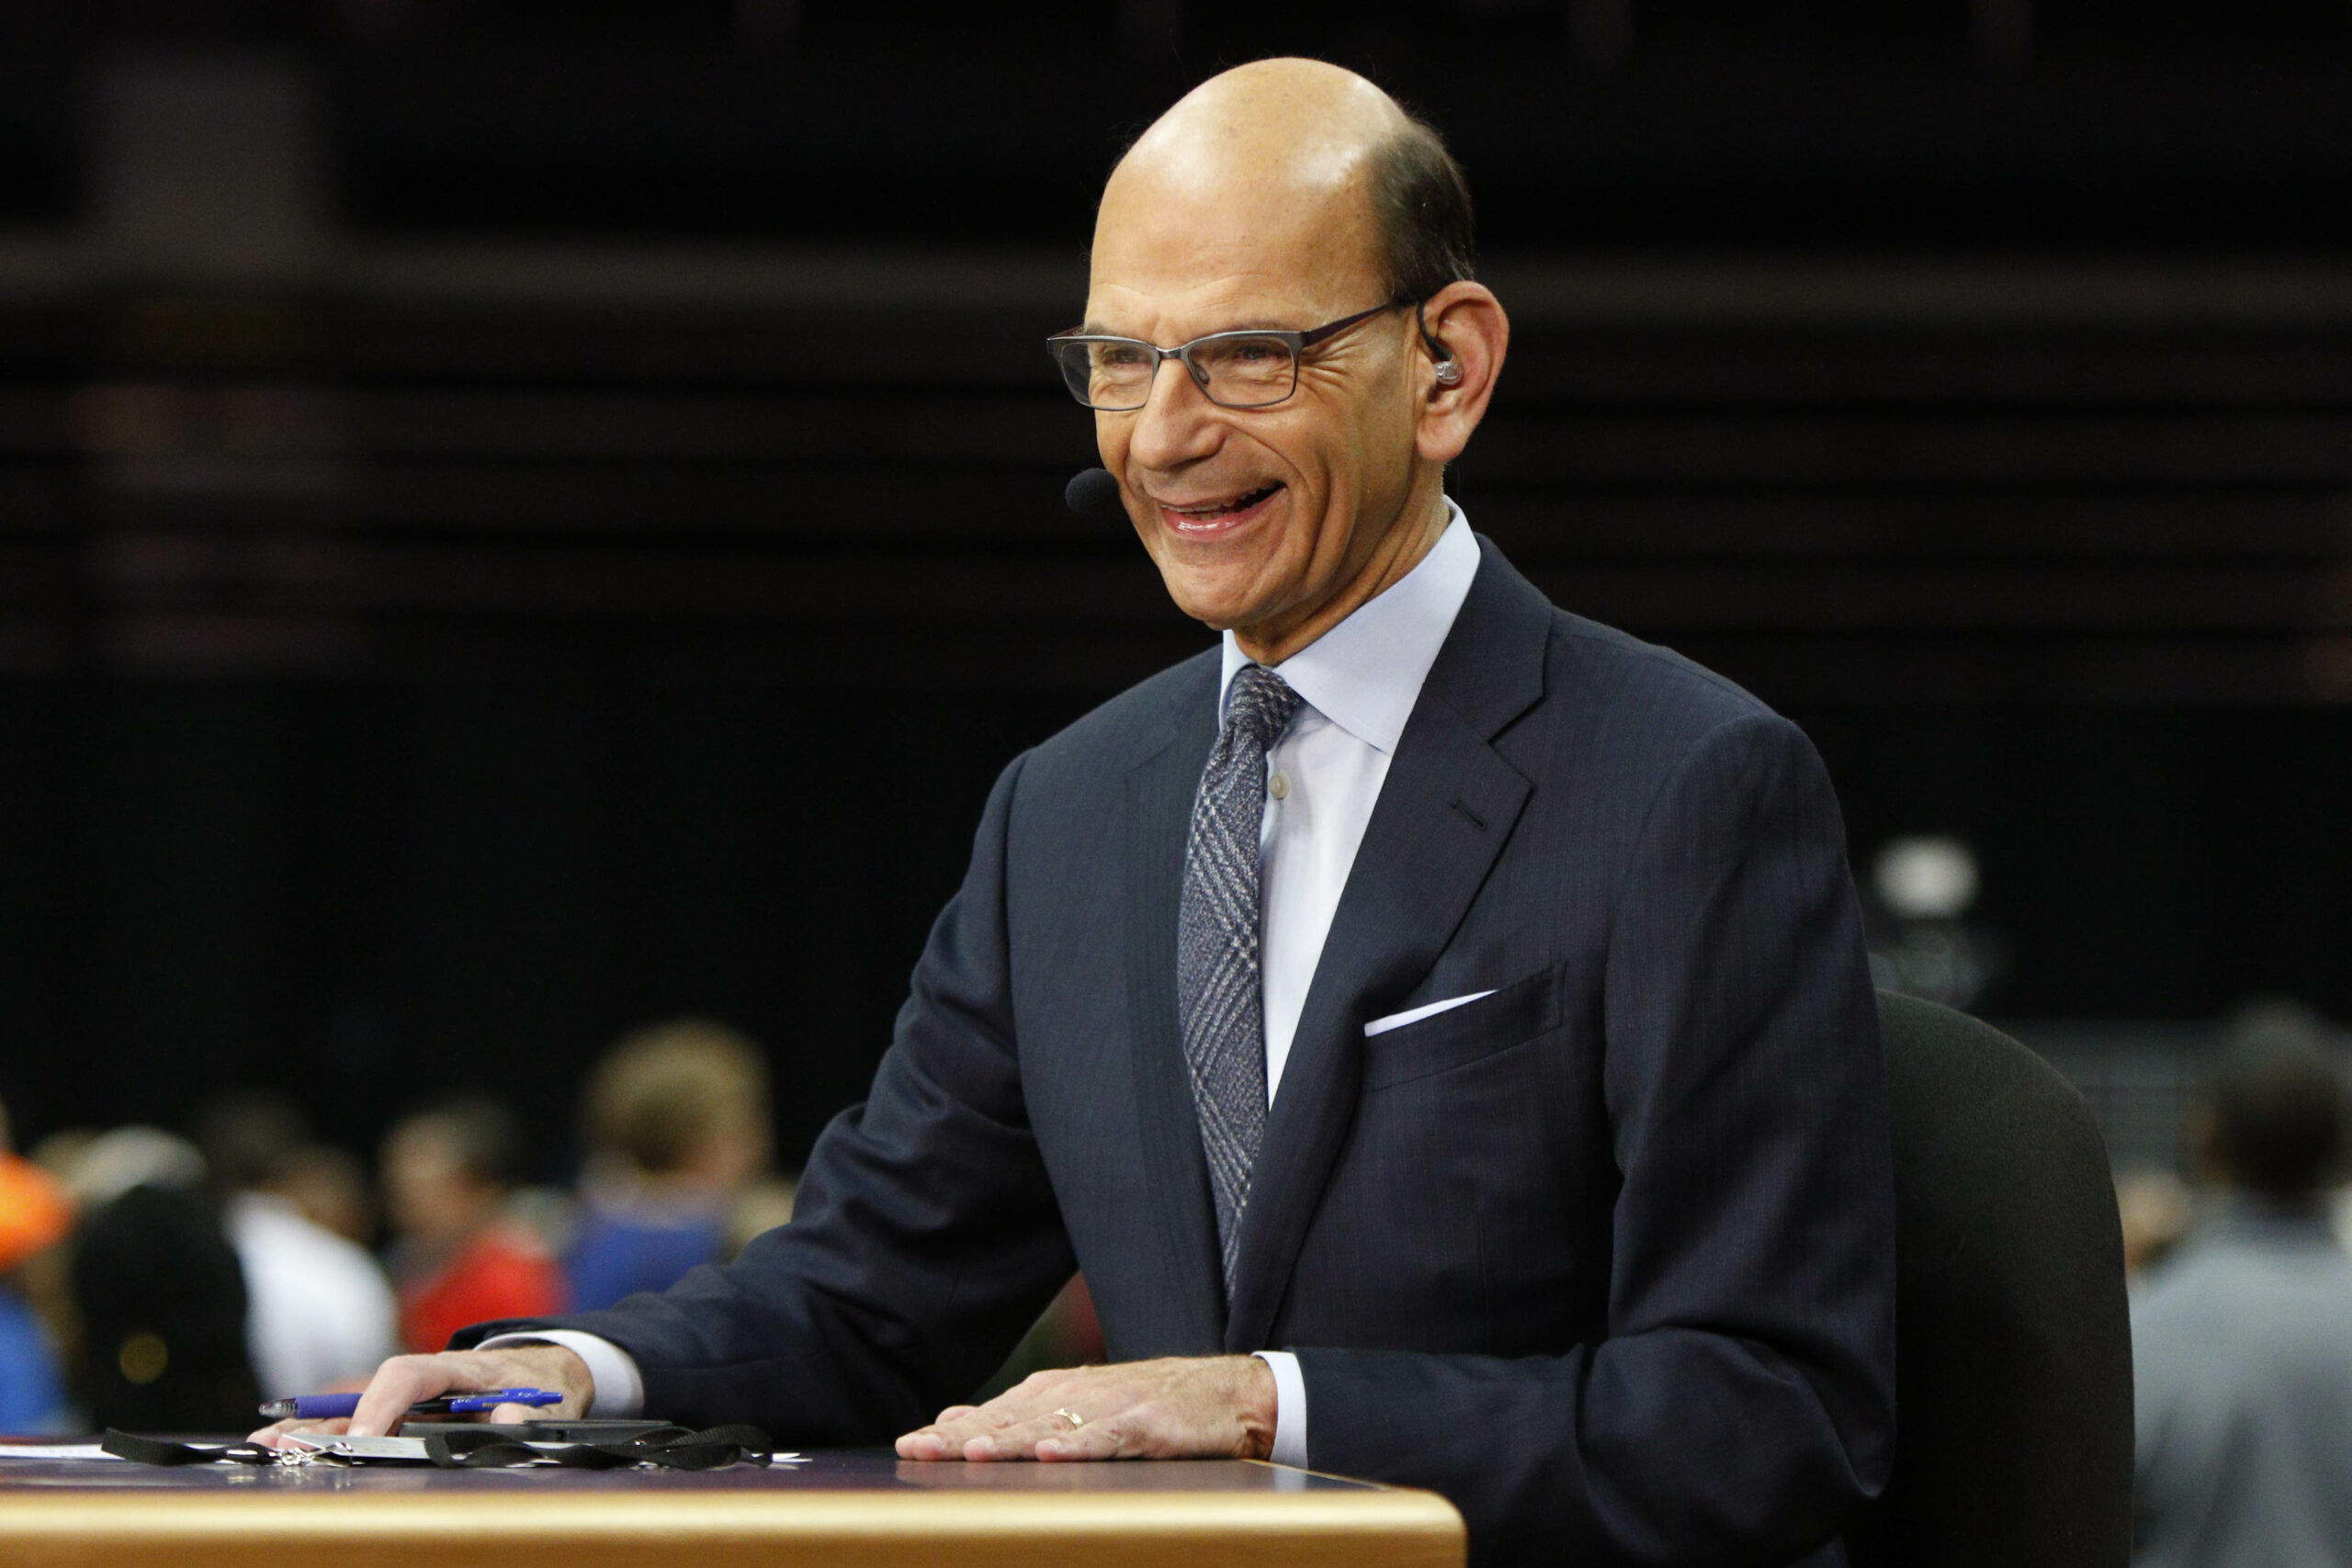 Billy Napier could’t care less about Paul Finebaum’s 2022 prediction